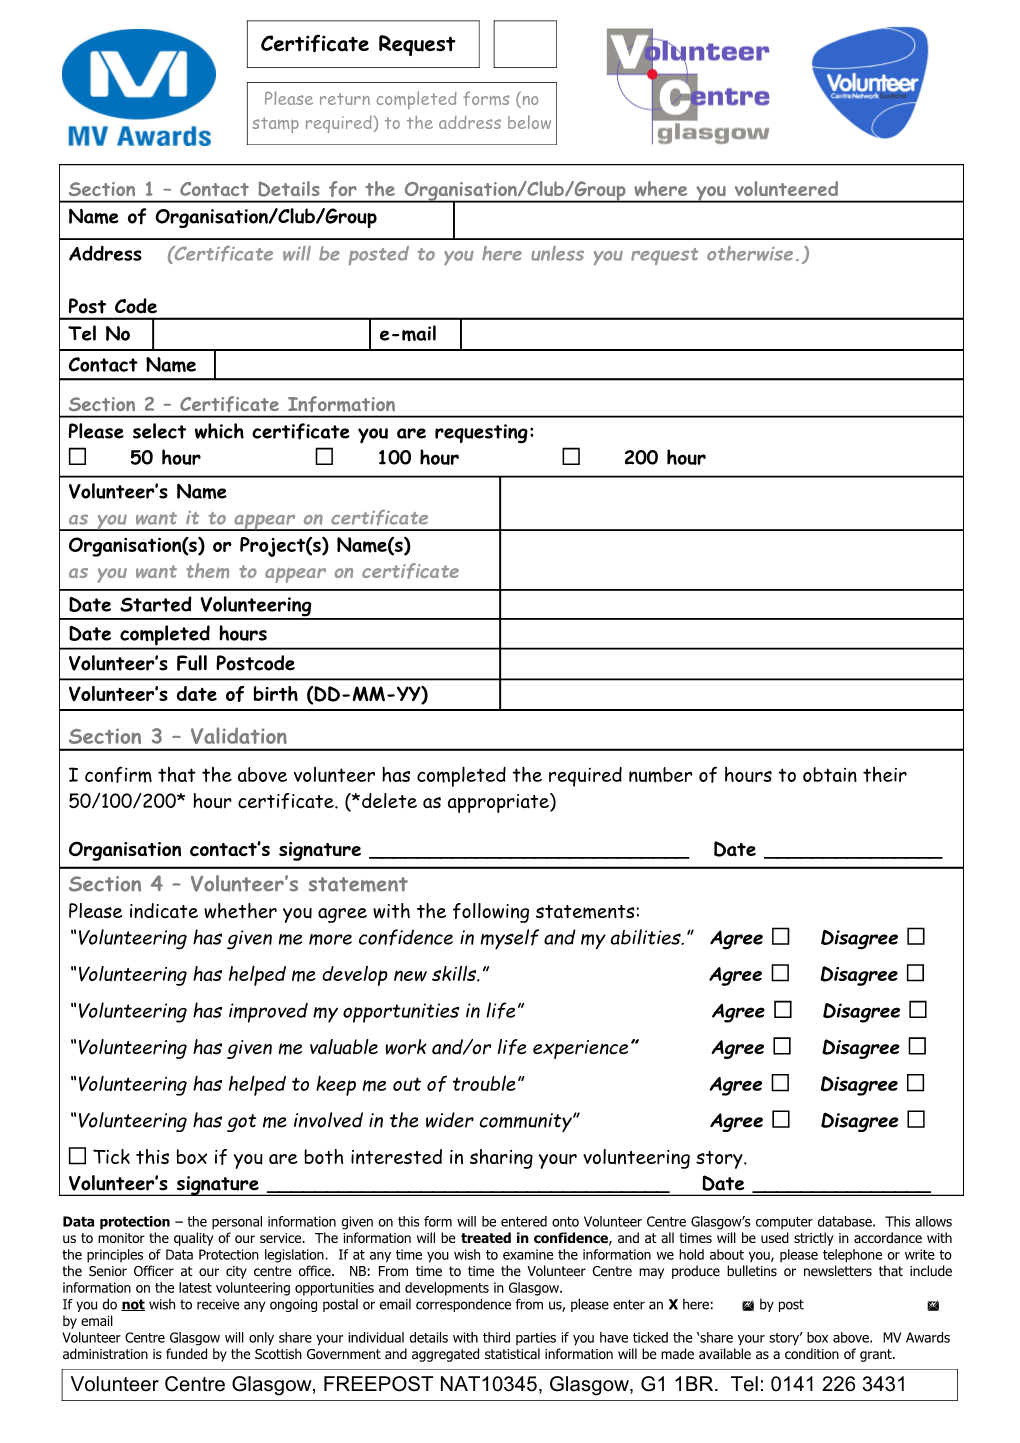 MV Award Certificate Request Form with Suggested Qualitative Indicators - 21/06/07